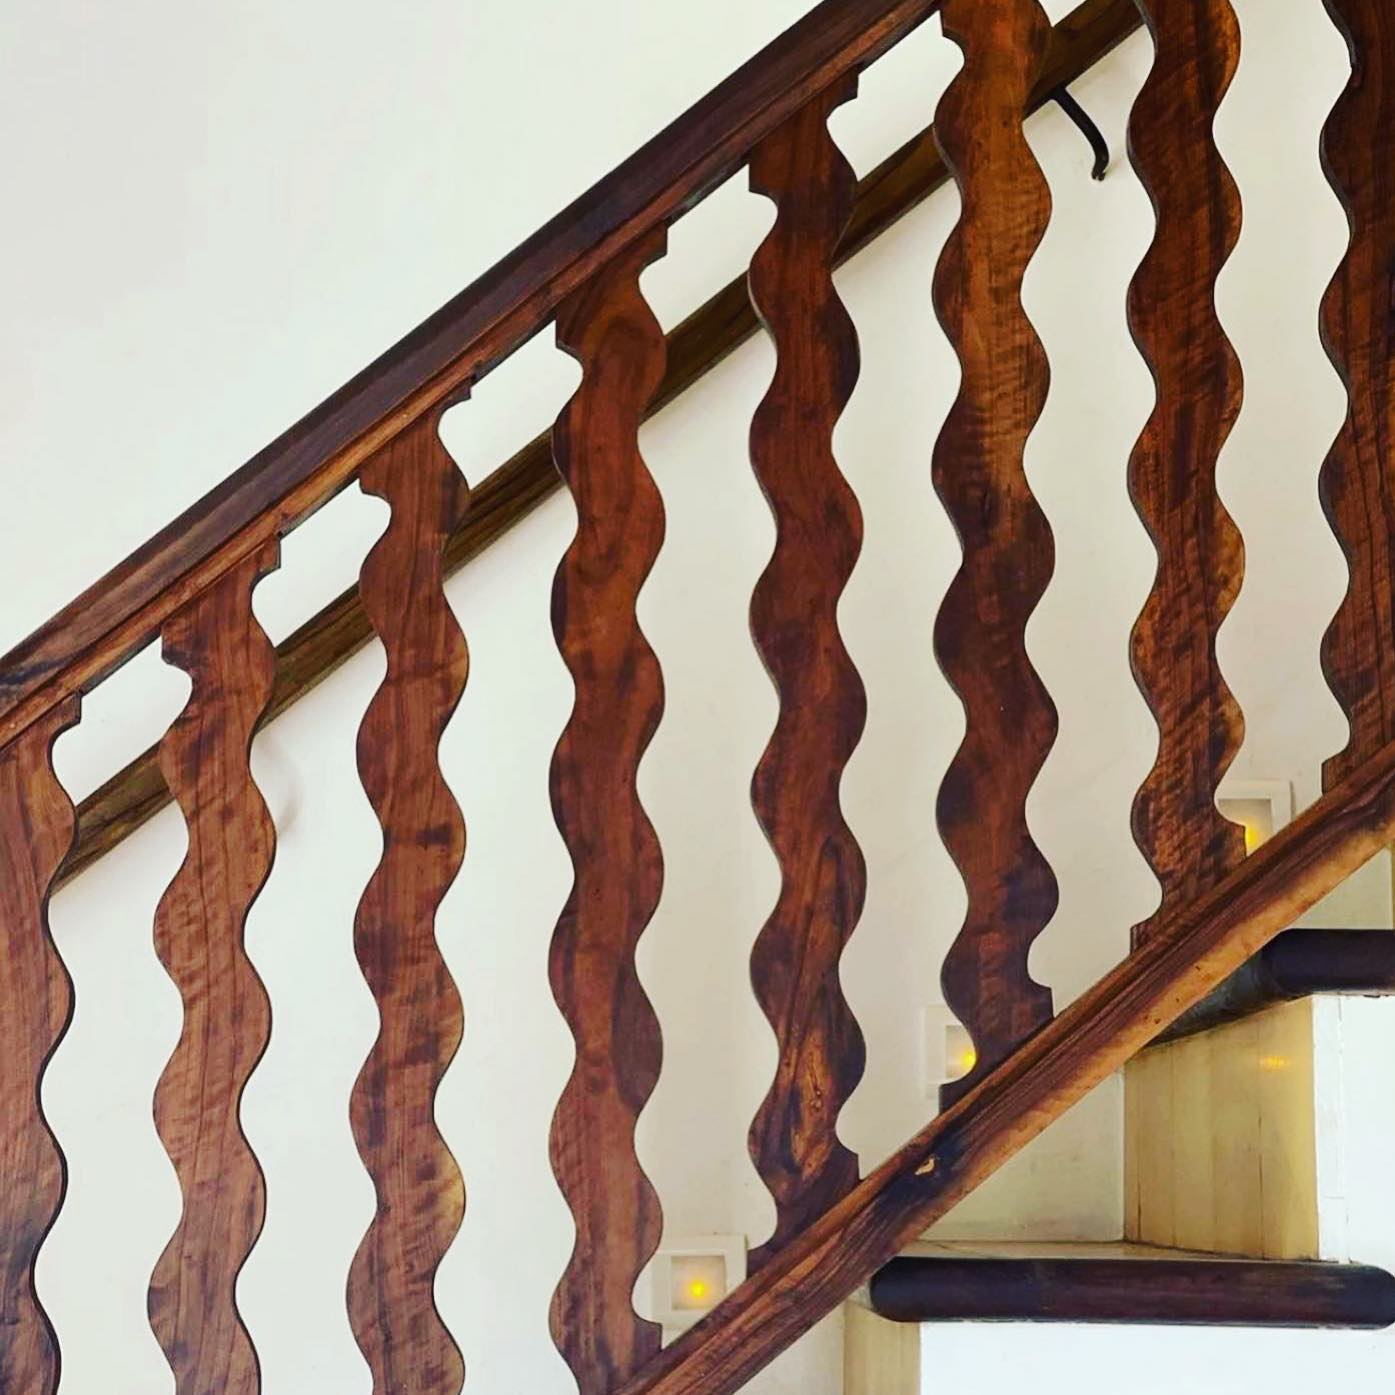 Scalloped staircase detail by Robert Graves from @nicolefullerinteriors